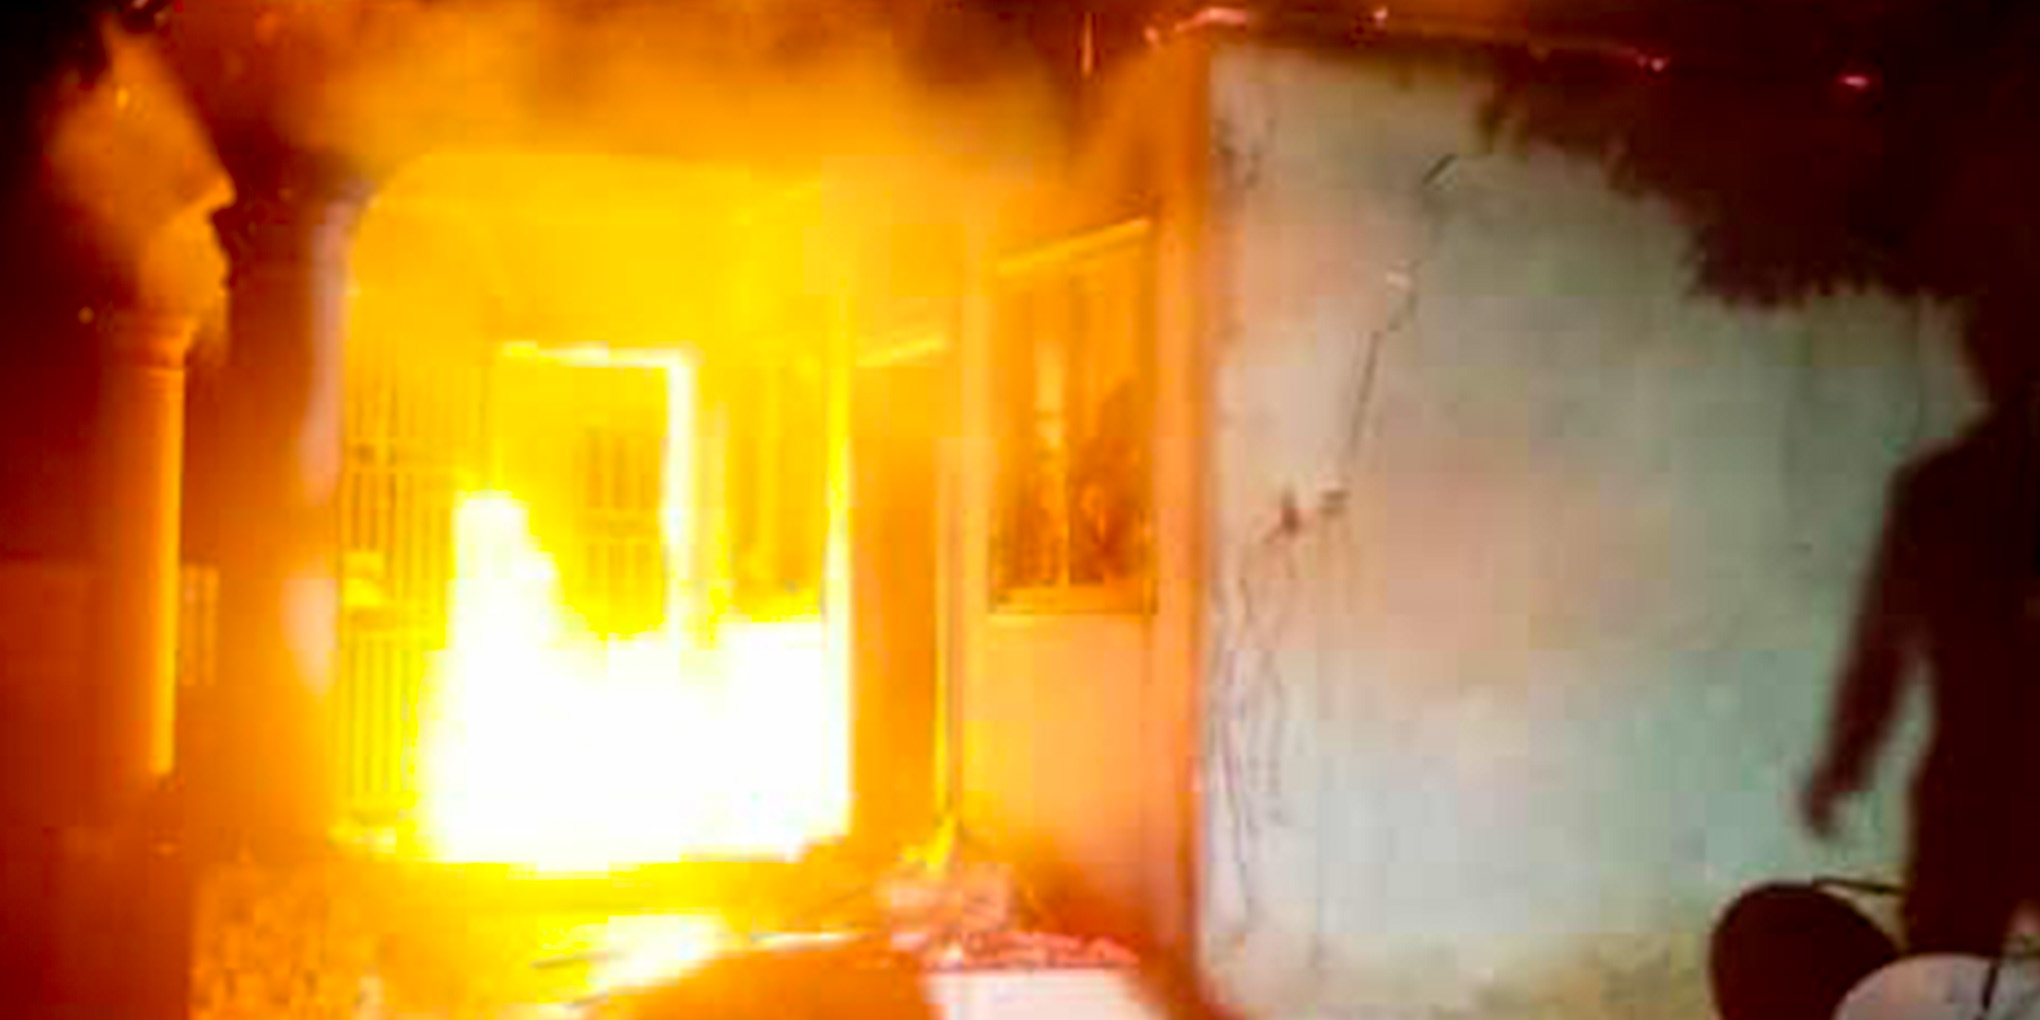 3 bedroom self-contained house in Bibiani destroy by fire.